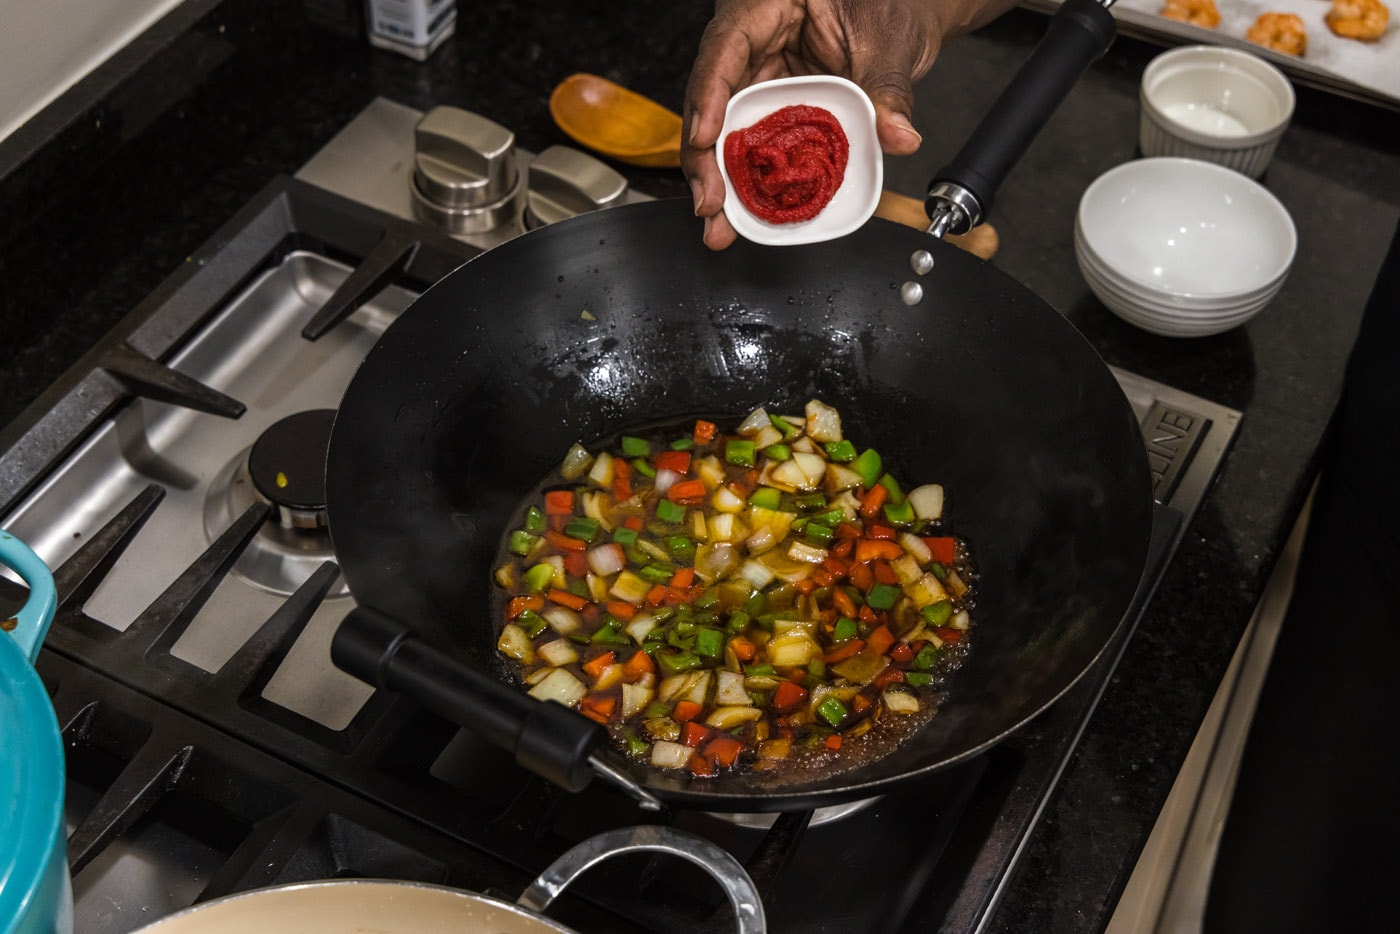 tomato paste added to skillet with vegetables